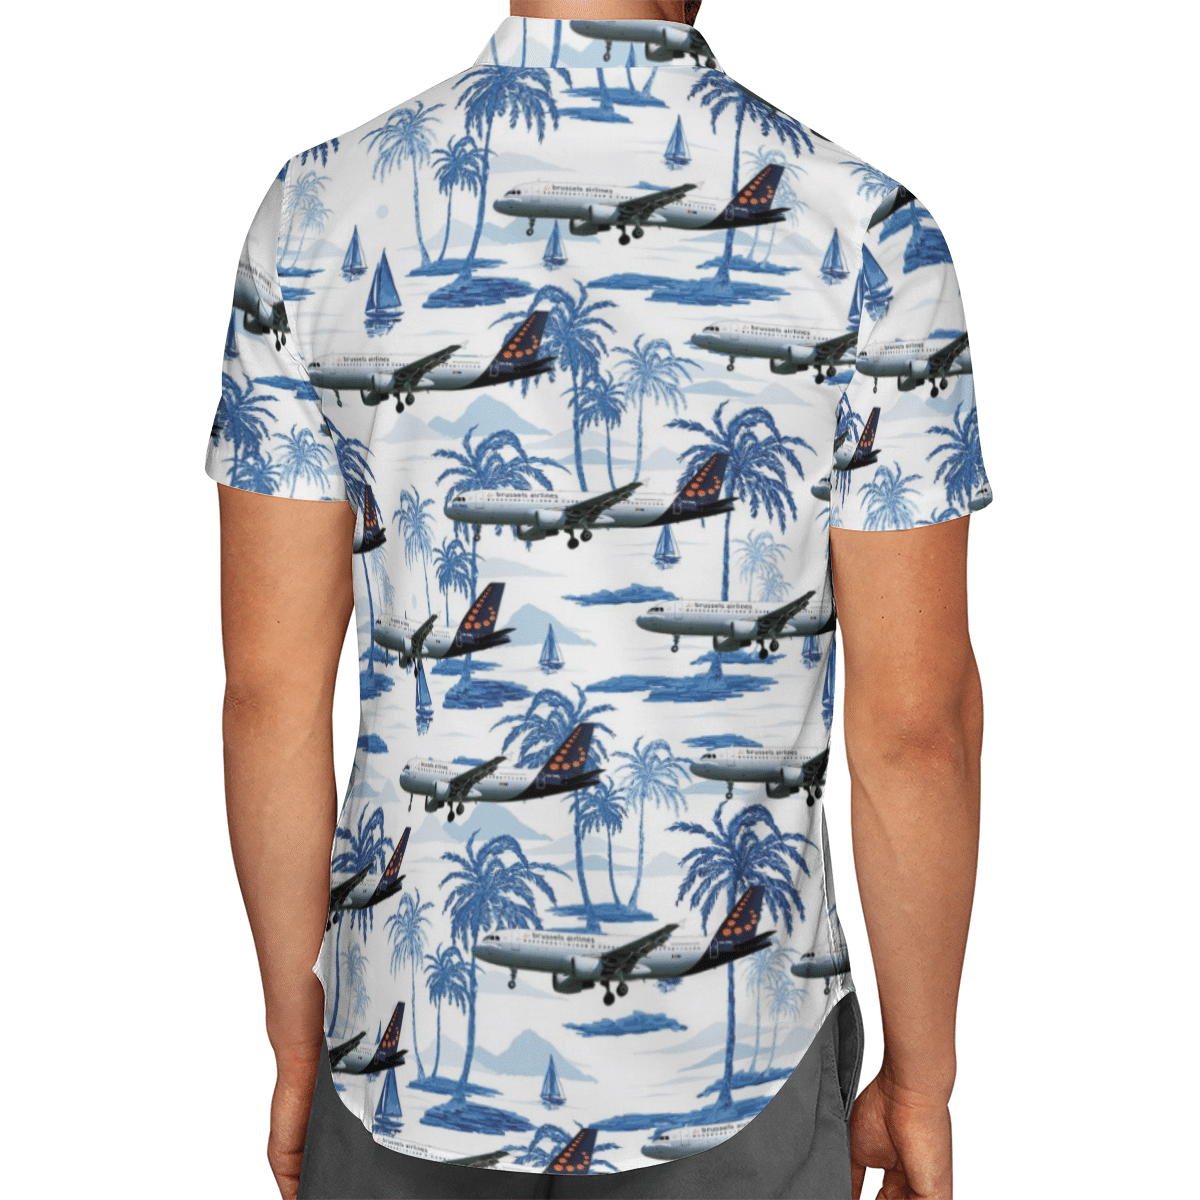 Going to the beach with a quality shirt 109